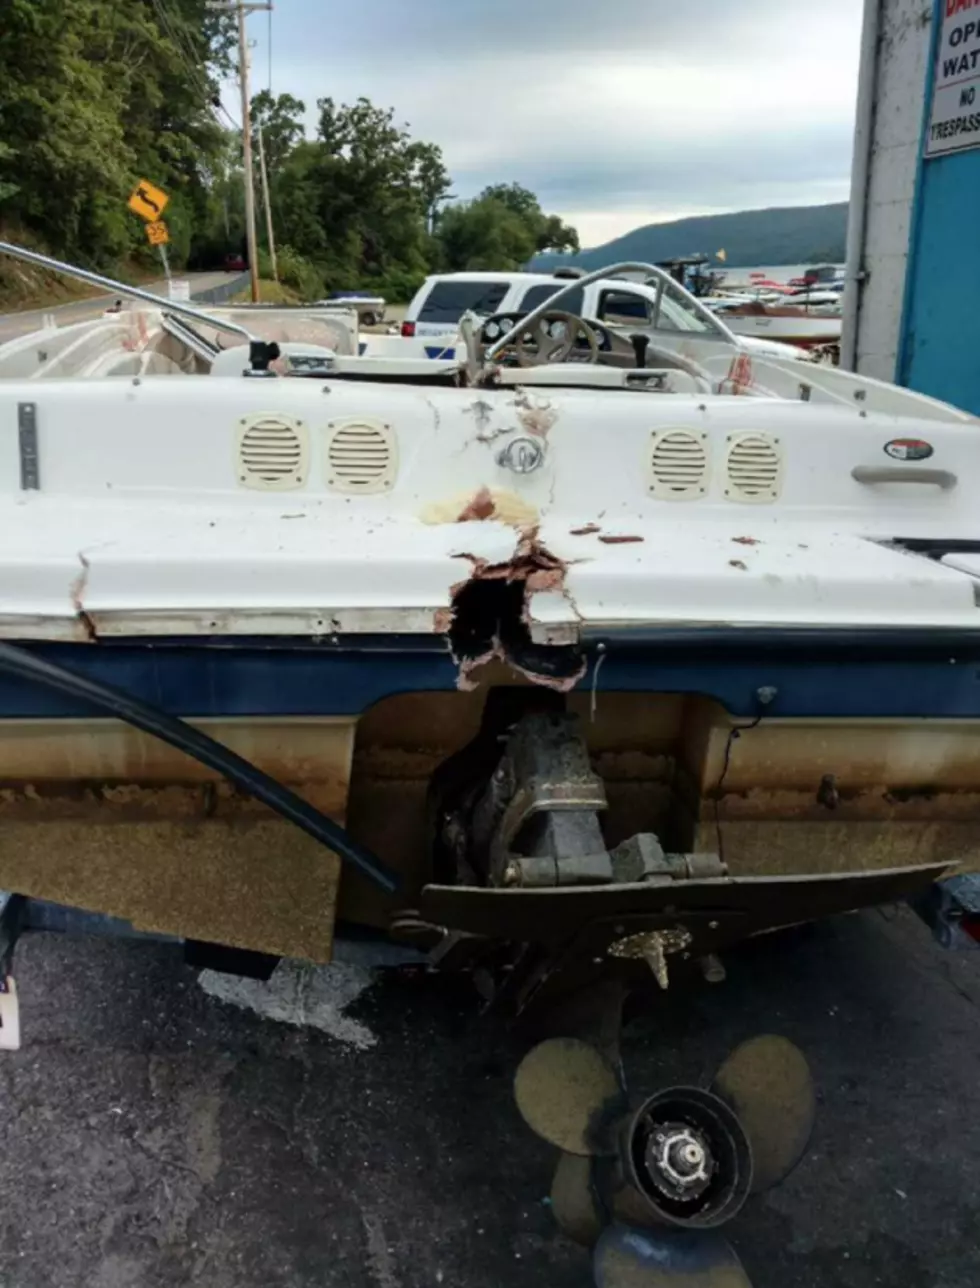 2 critically injured in hit-and-run boat crash, operator sought